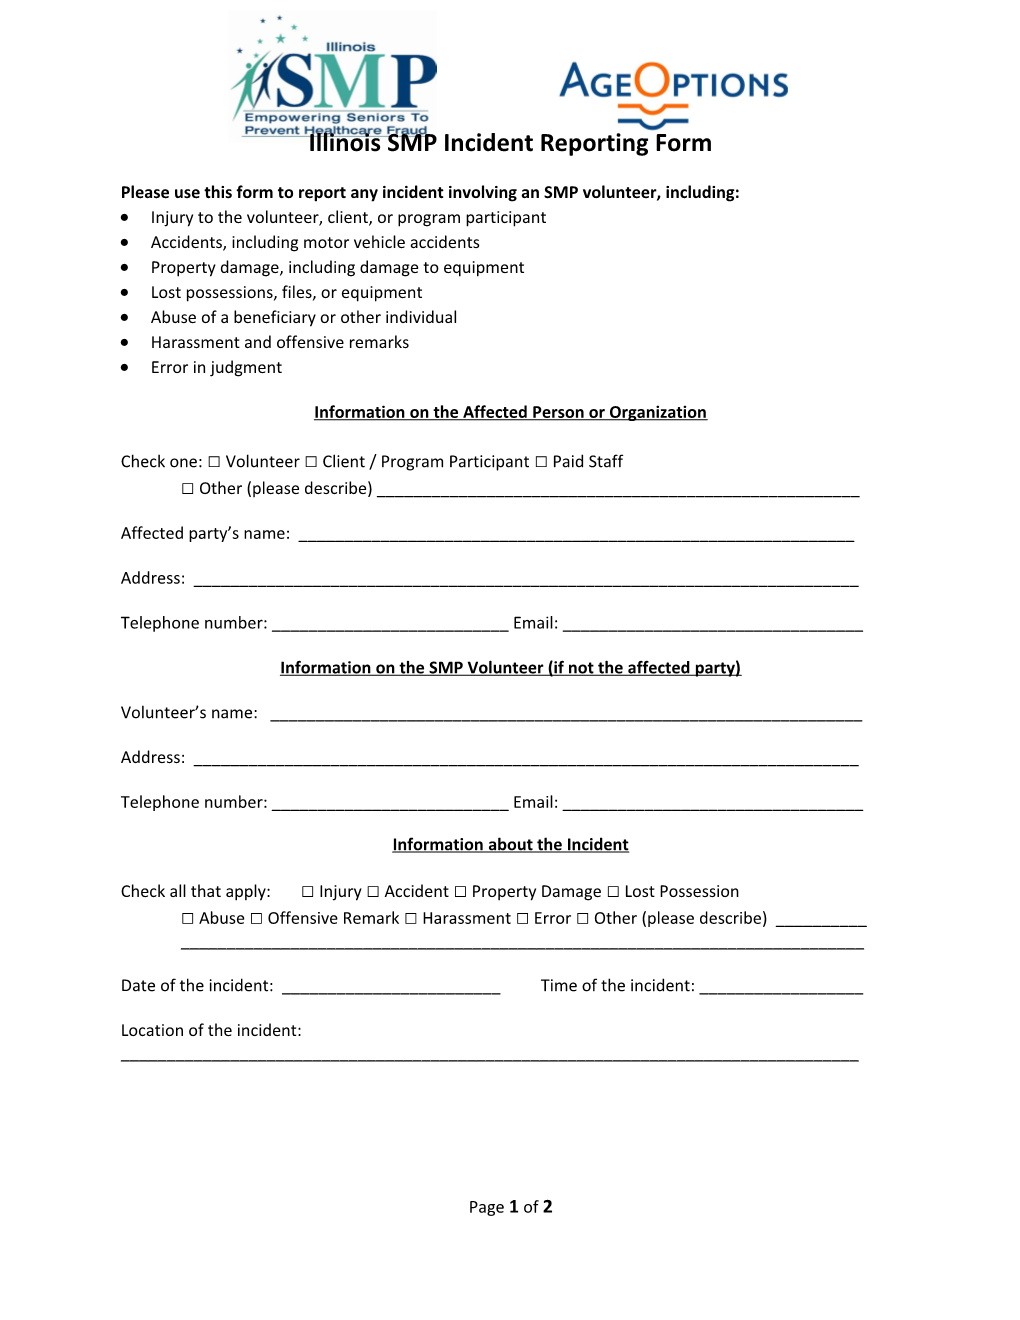 Illinois SMP Incident Reporting Form